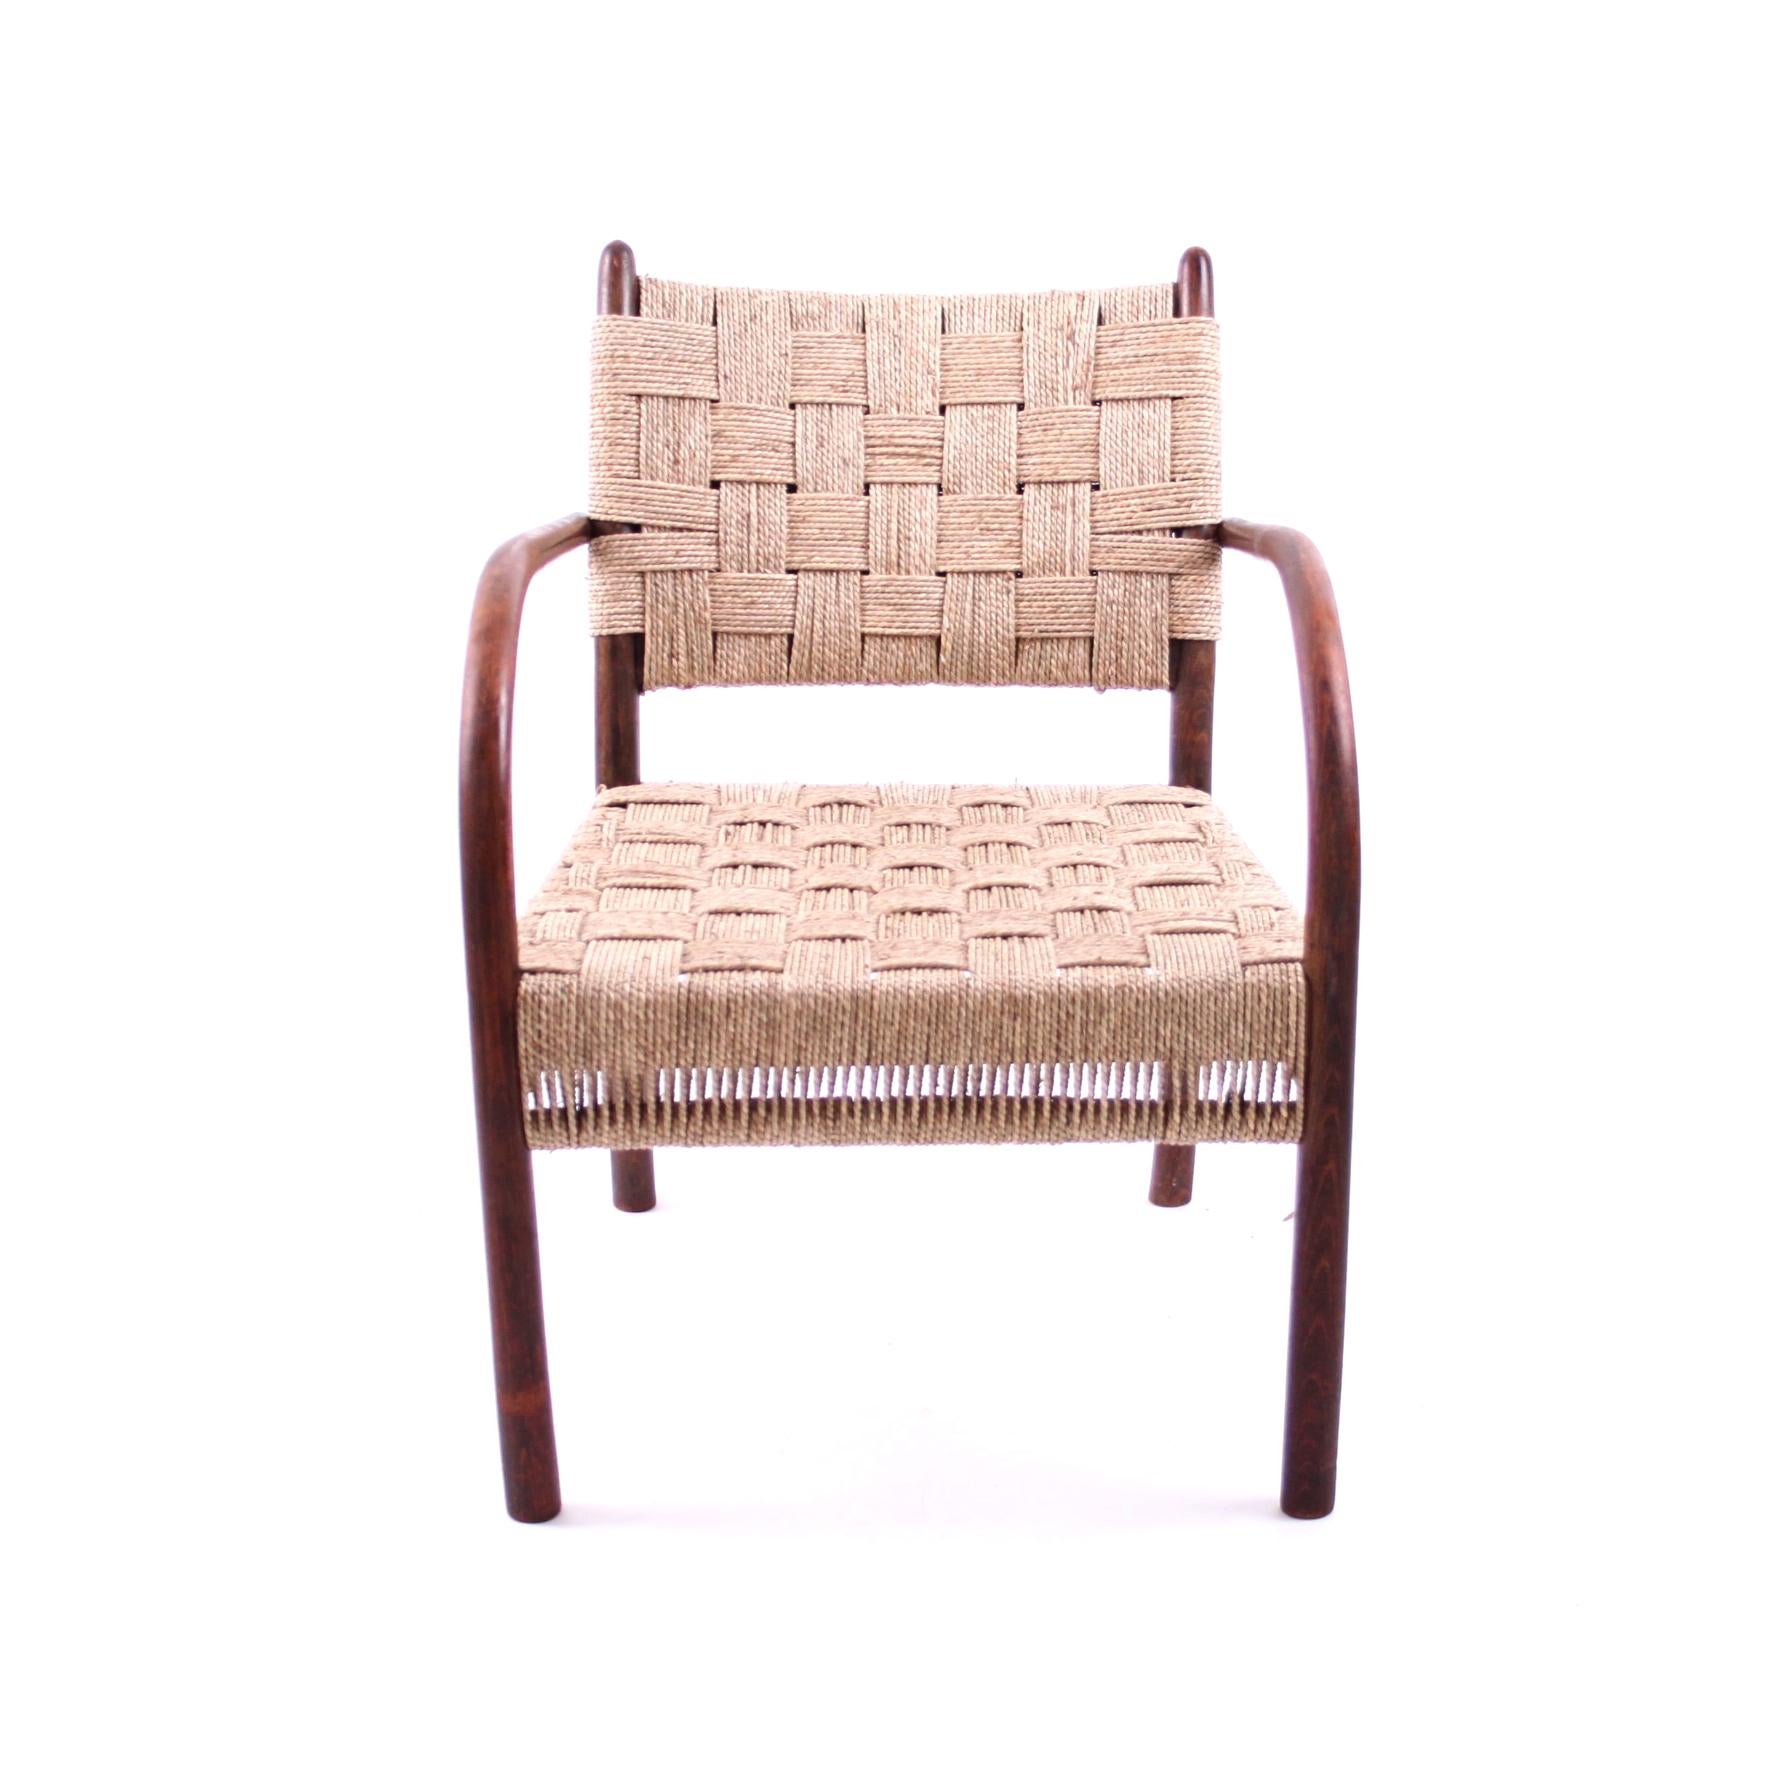 Karl Scröder & Fritz Hansen - Scandinavian Modern design

Beautiful and rare armchair in stained beech and woven seagrass seat and back. 

Model 1459. Manufactured by Fritz Hansen, 1938. 

Until very recently this rare and sought after armchair was